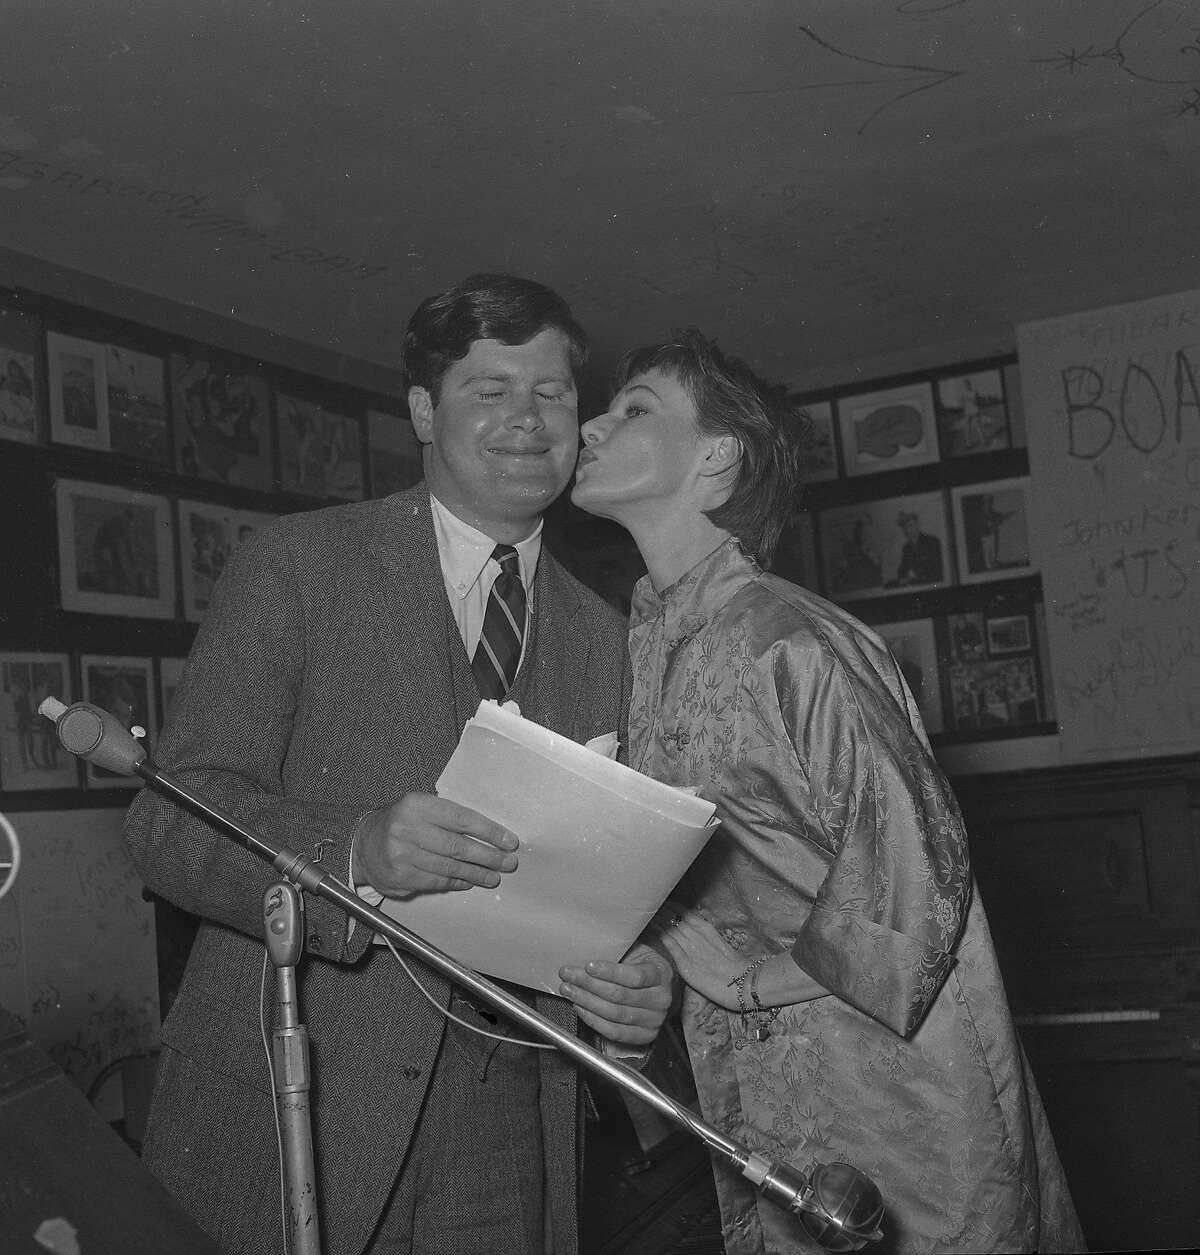 Warren Hinckle, kissed by Charlotte Fairchild, during his run for Supervisor Photo taken August 29, 1961